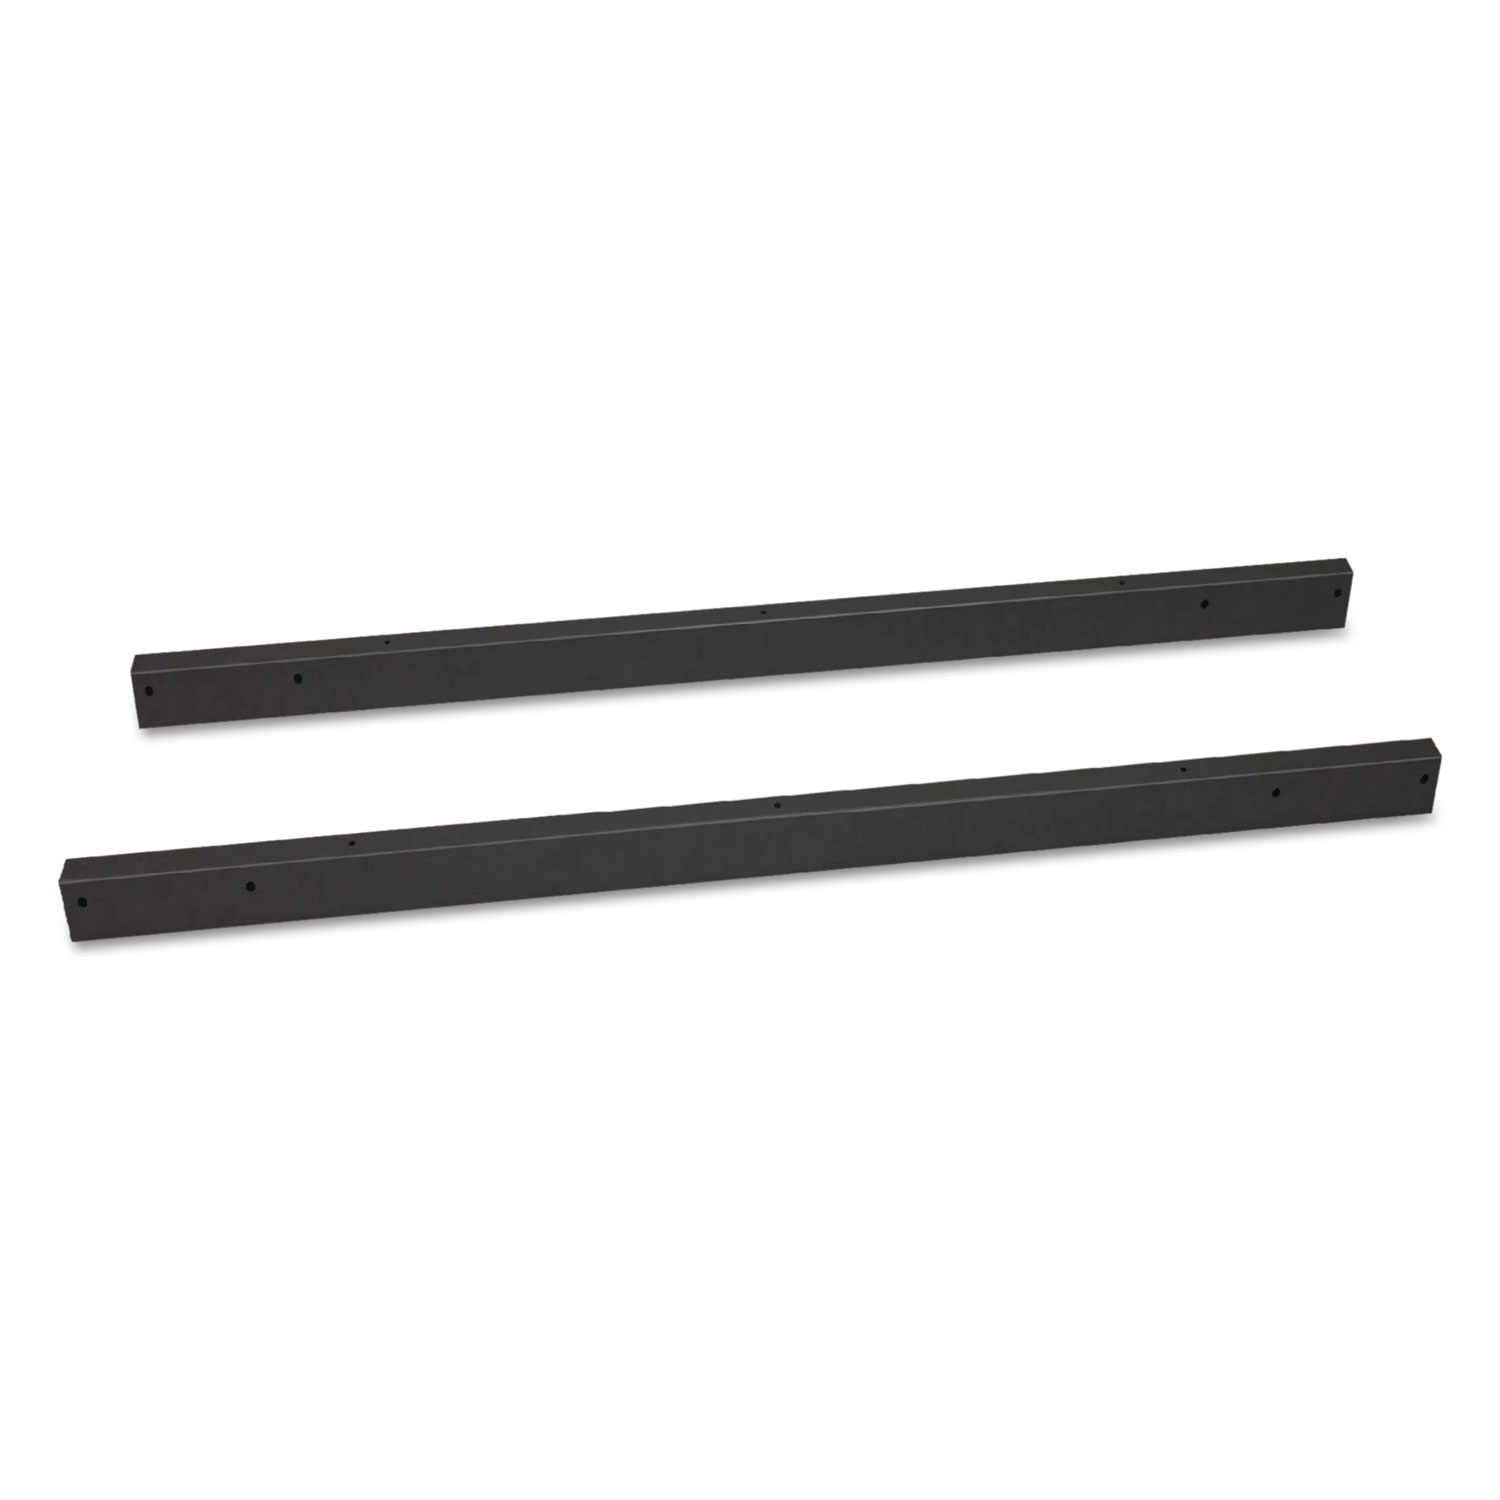 Electric Height-Adjustable Table Cross Bar Kit for 42 to 53 Worksurface, Black